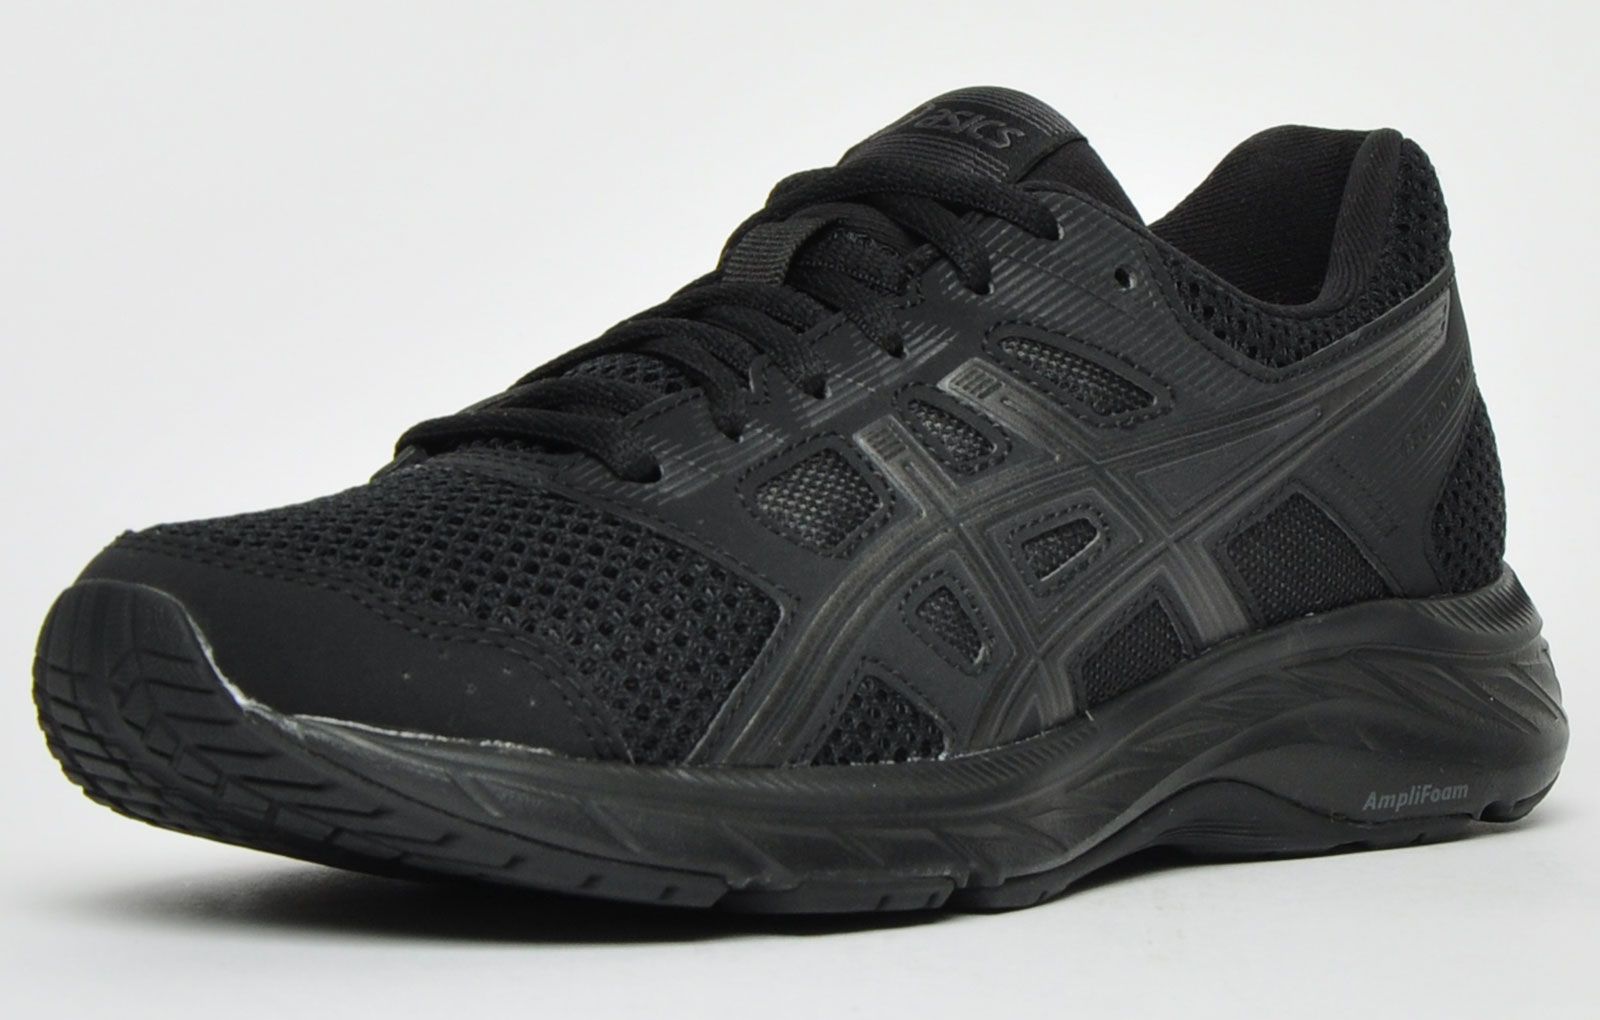 <p>The Asics Gel Contend 5 is a running shoe that’s packed with features designed to bring out your optimum level of performance. The Rearfoot Gel technology cushioning system reduces shock during the impact phase and allows for a smooth transition to midstance, while the upper features a laminate midcage to provide support and stability and an Amplifoam insole to keep your feet comfortable during even the most arduous runs. <br></p><br><p class=